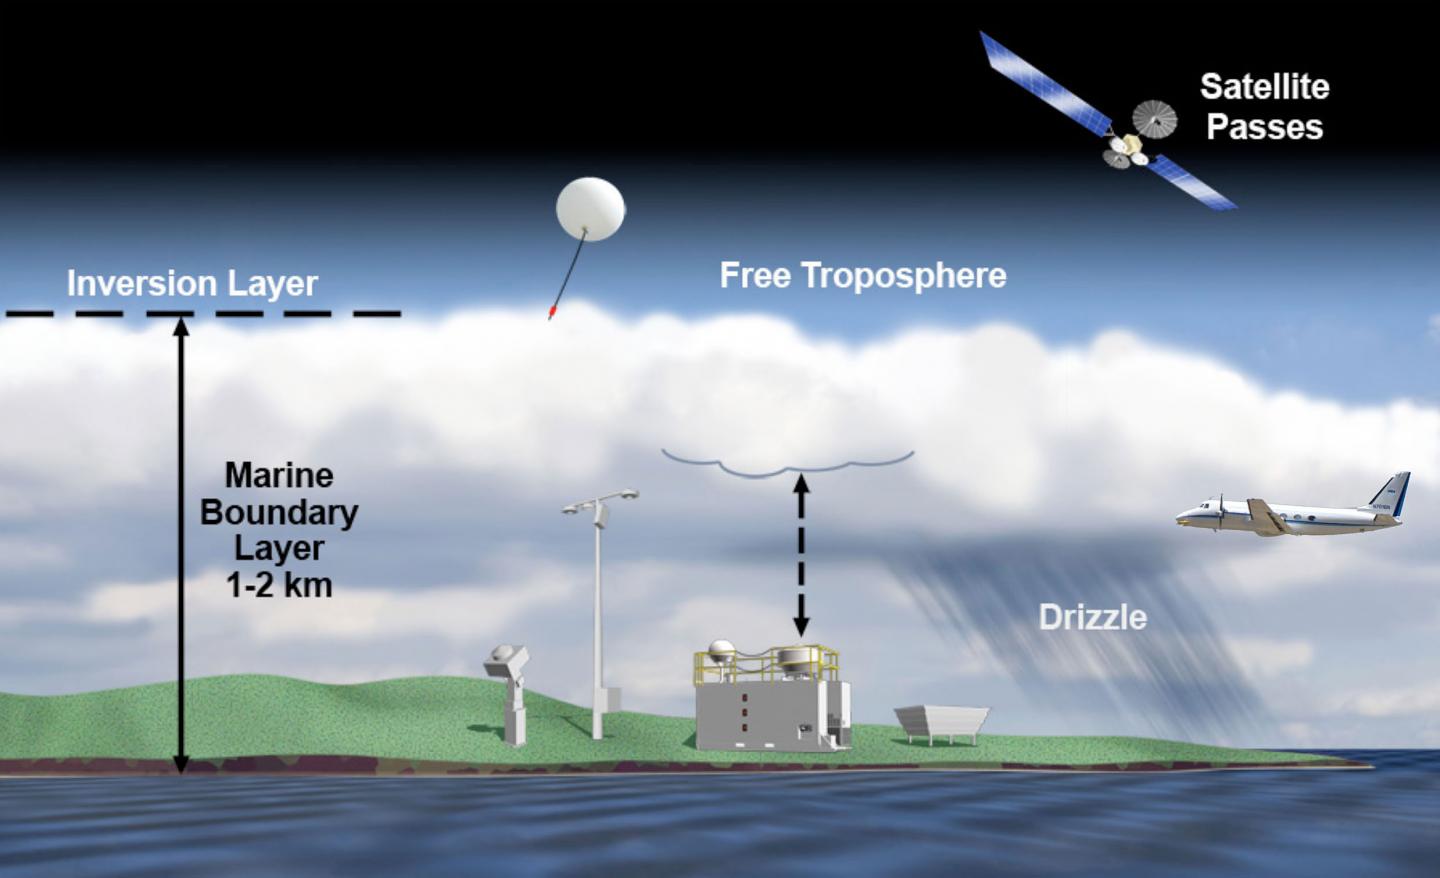 Using An Aircraft Scientists Will Traverse Horizontal Tracks above and through Clouds